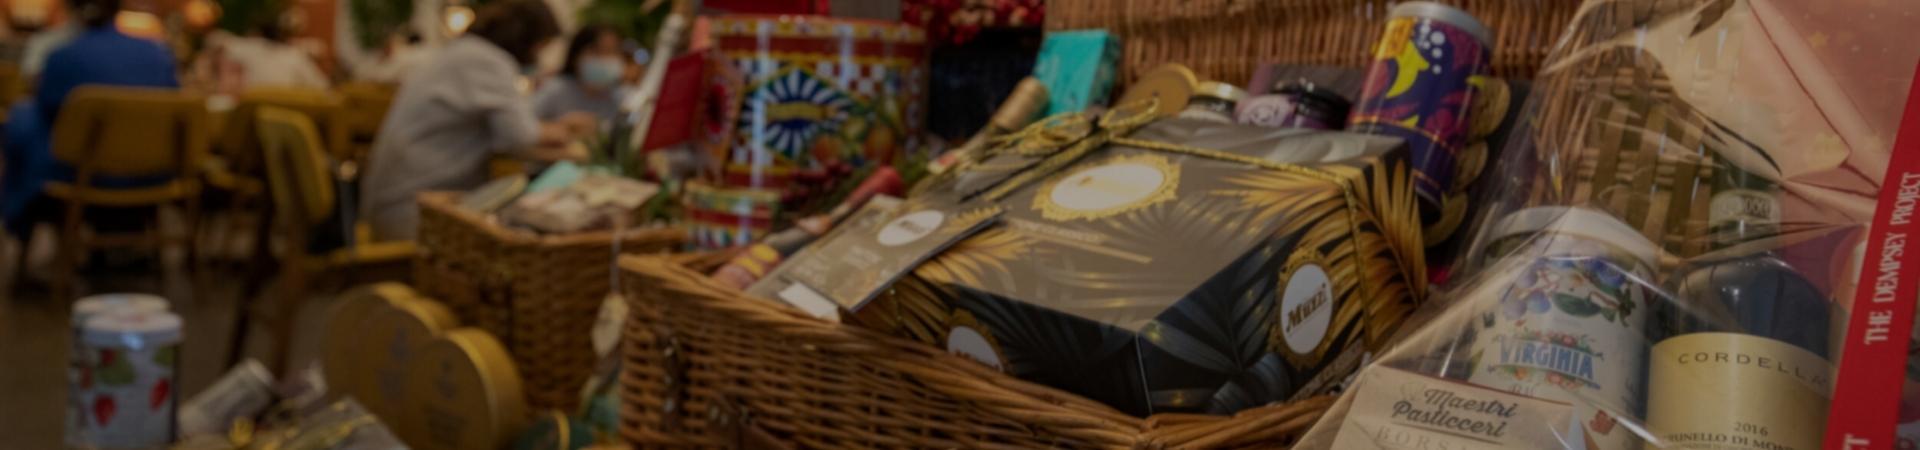 Hampers & Gifts - The Dempsey Project